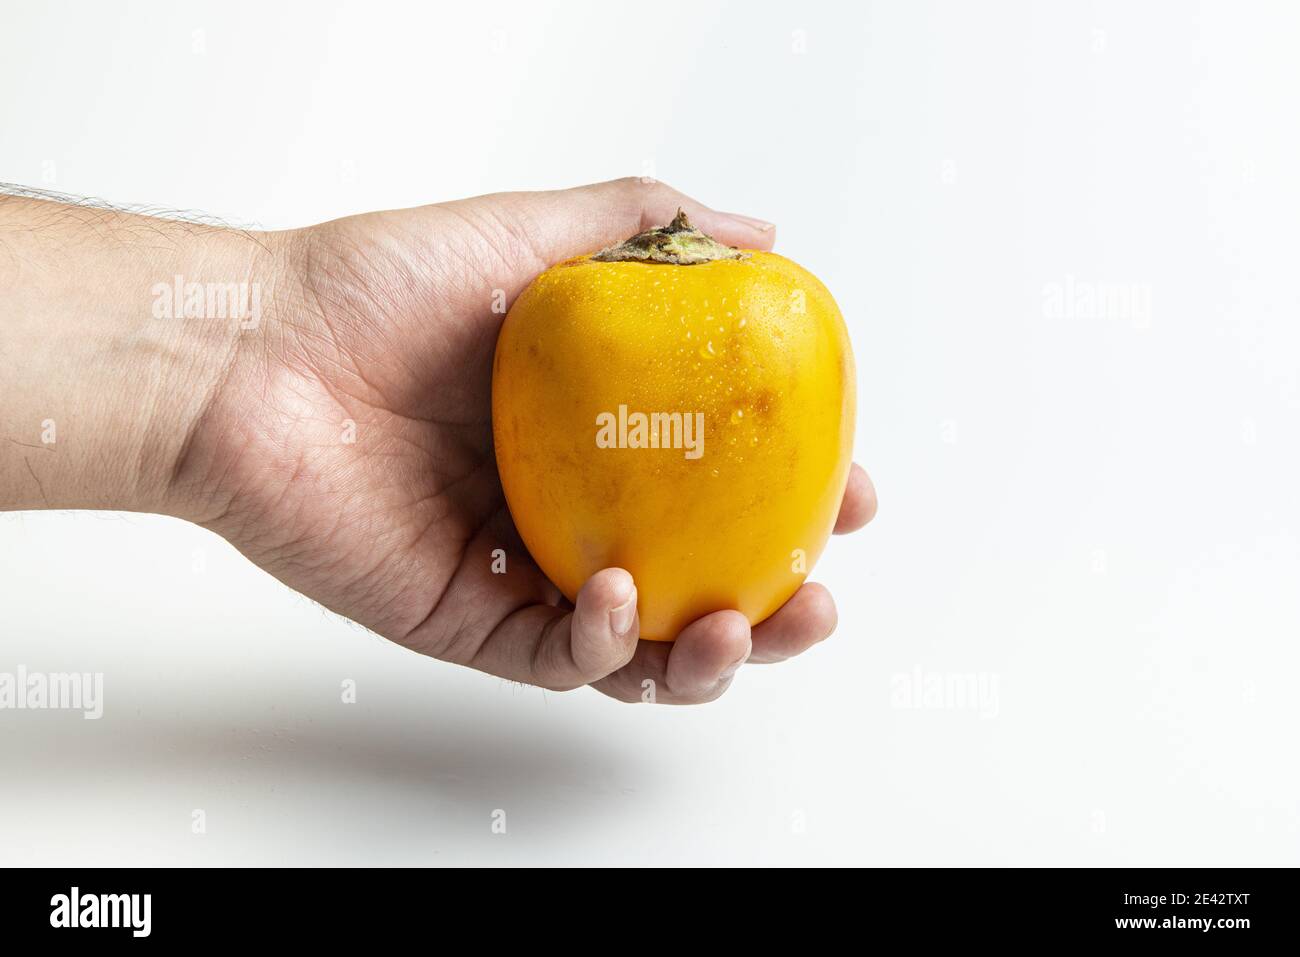 Isolated shot of a hand holding a Cocona tropical fruit (Solanum sessiliflorum) Stock Photo